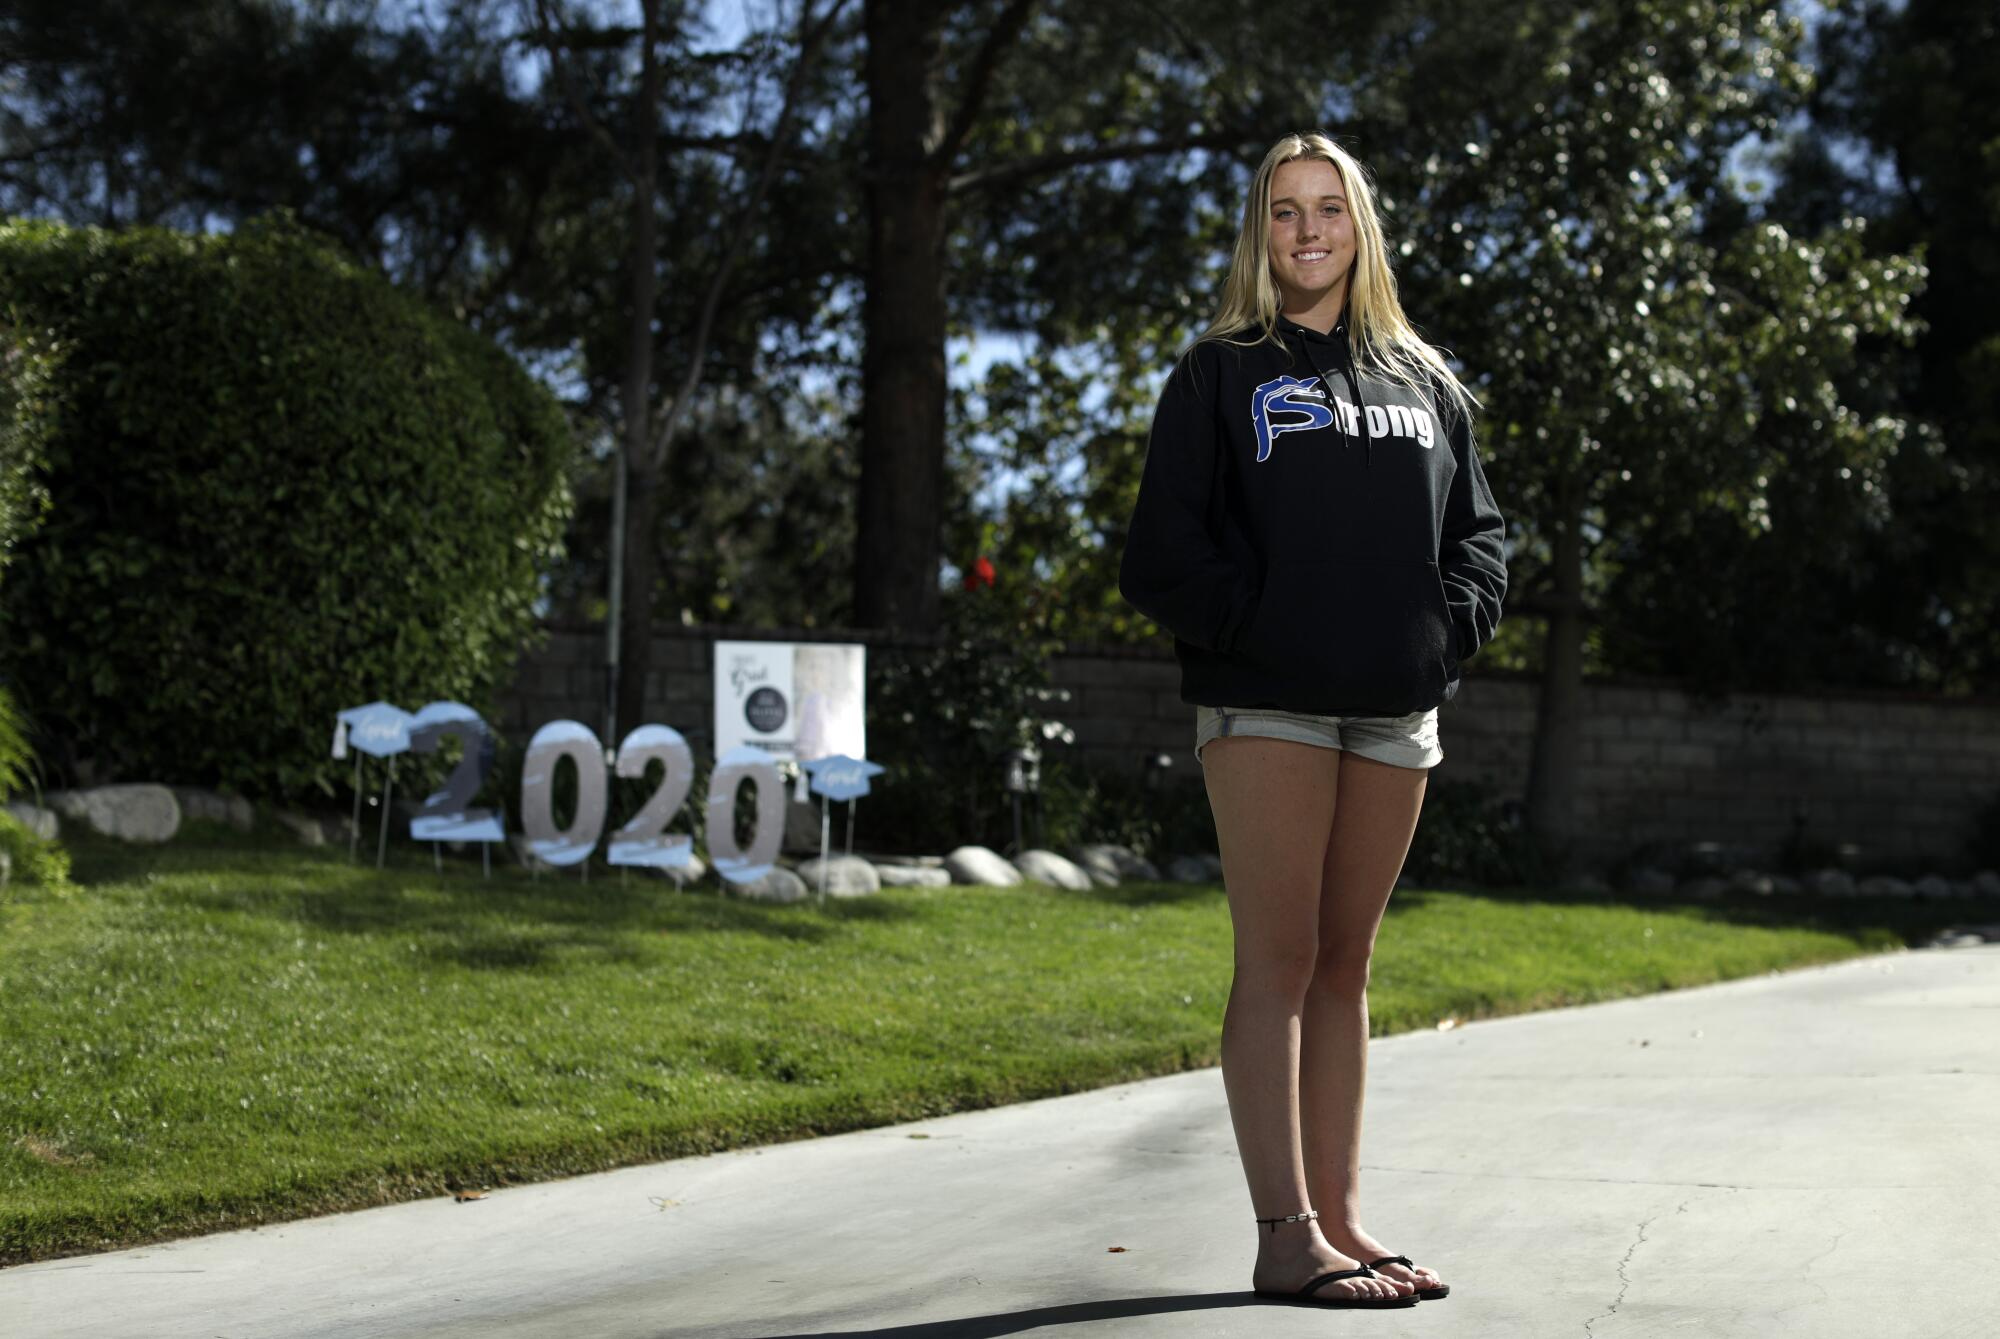 Senior Olivia White hopes there’s a chance for an in-person graduation ceremony in the future.